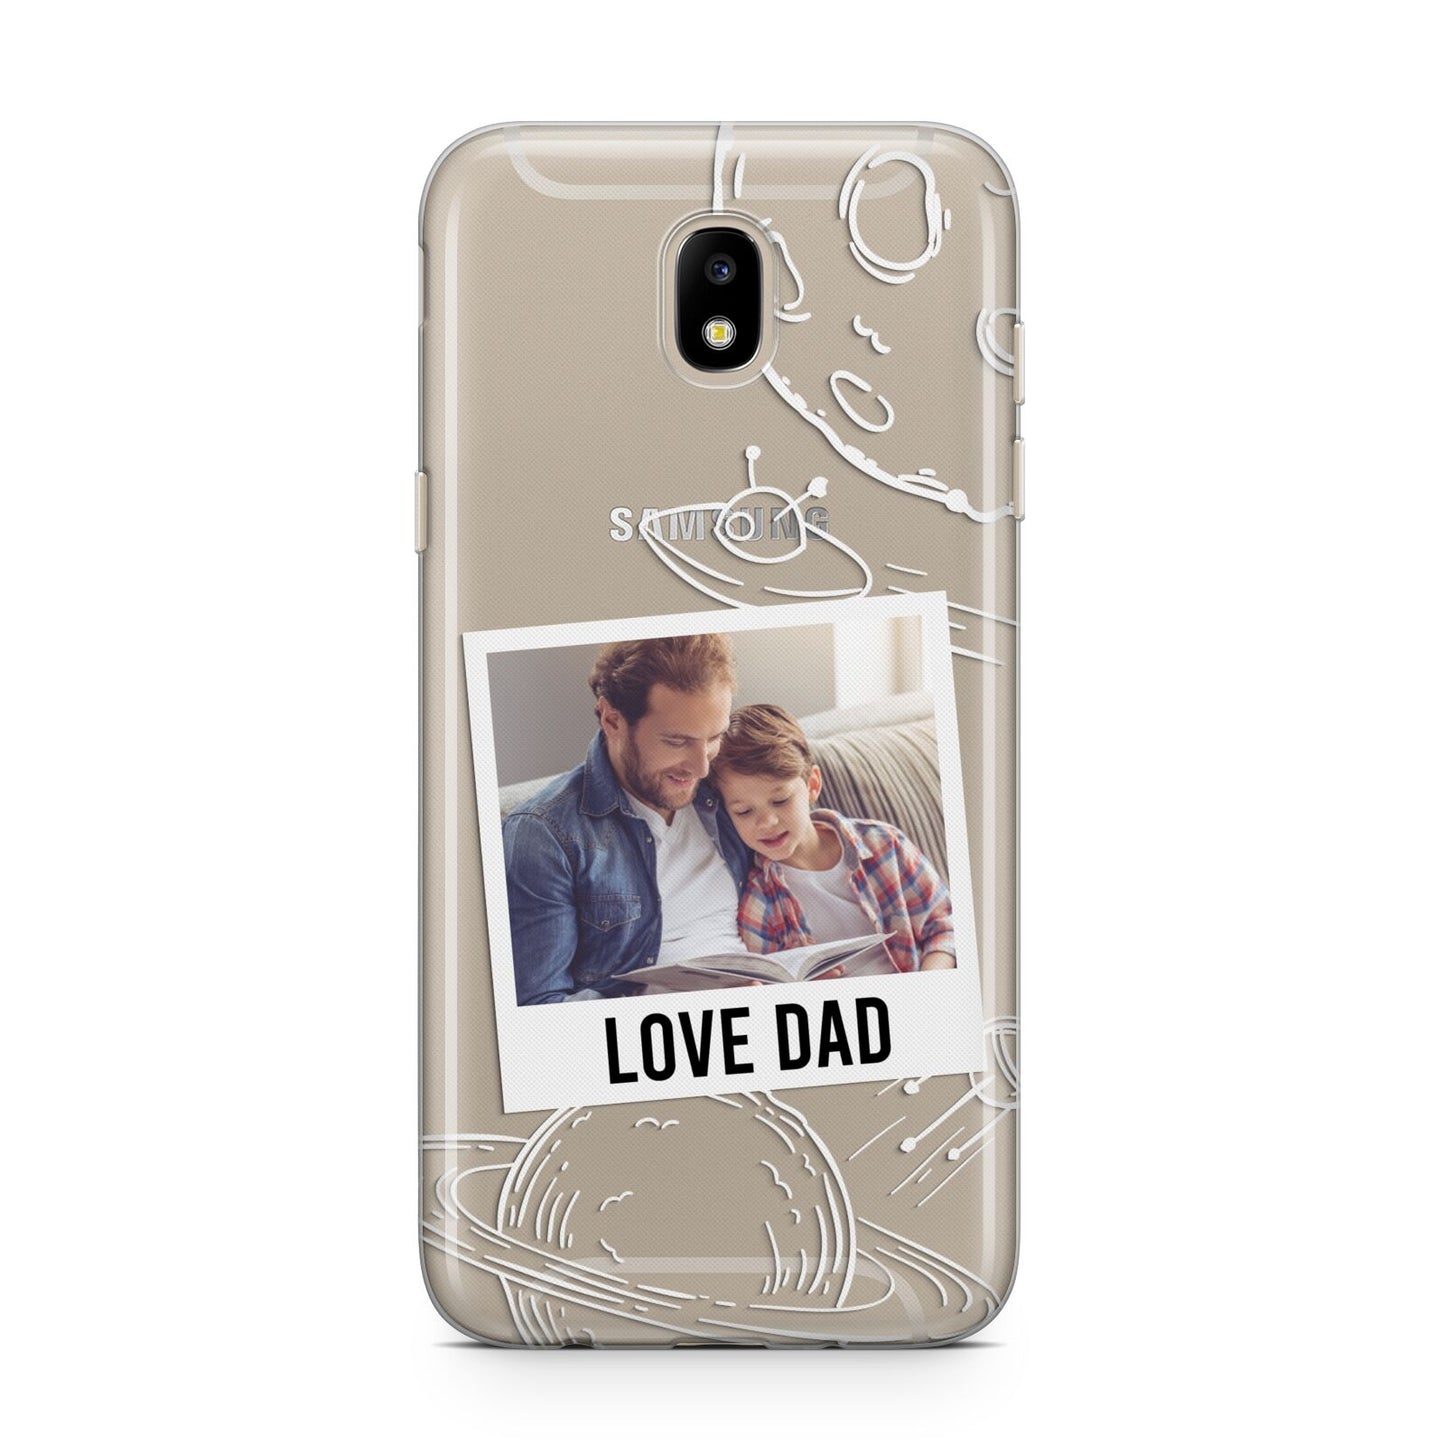 Personalised From Dad Photo Samsung J5 2017 Case